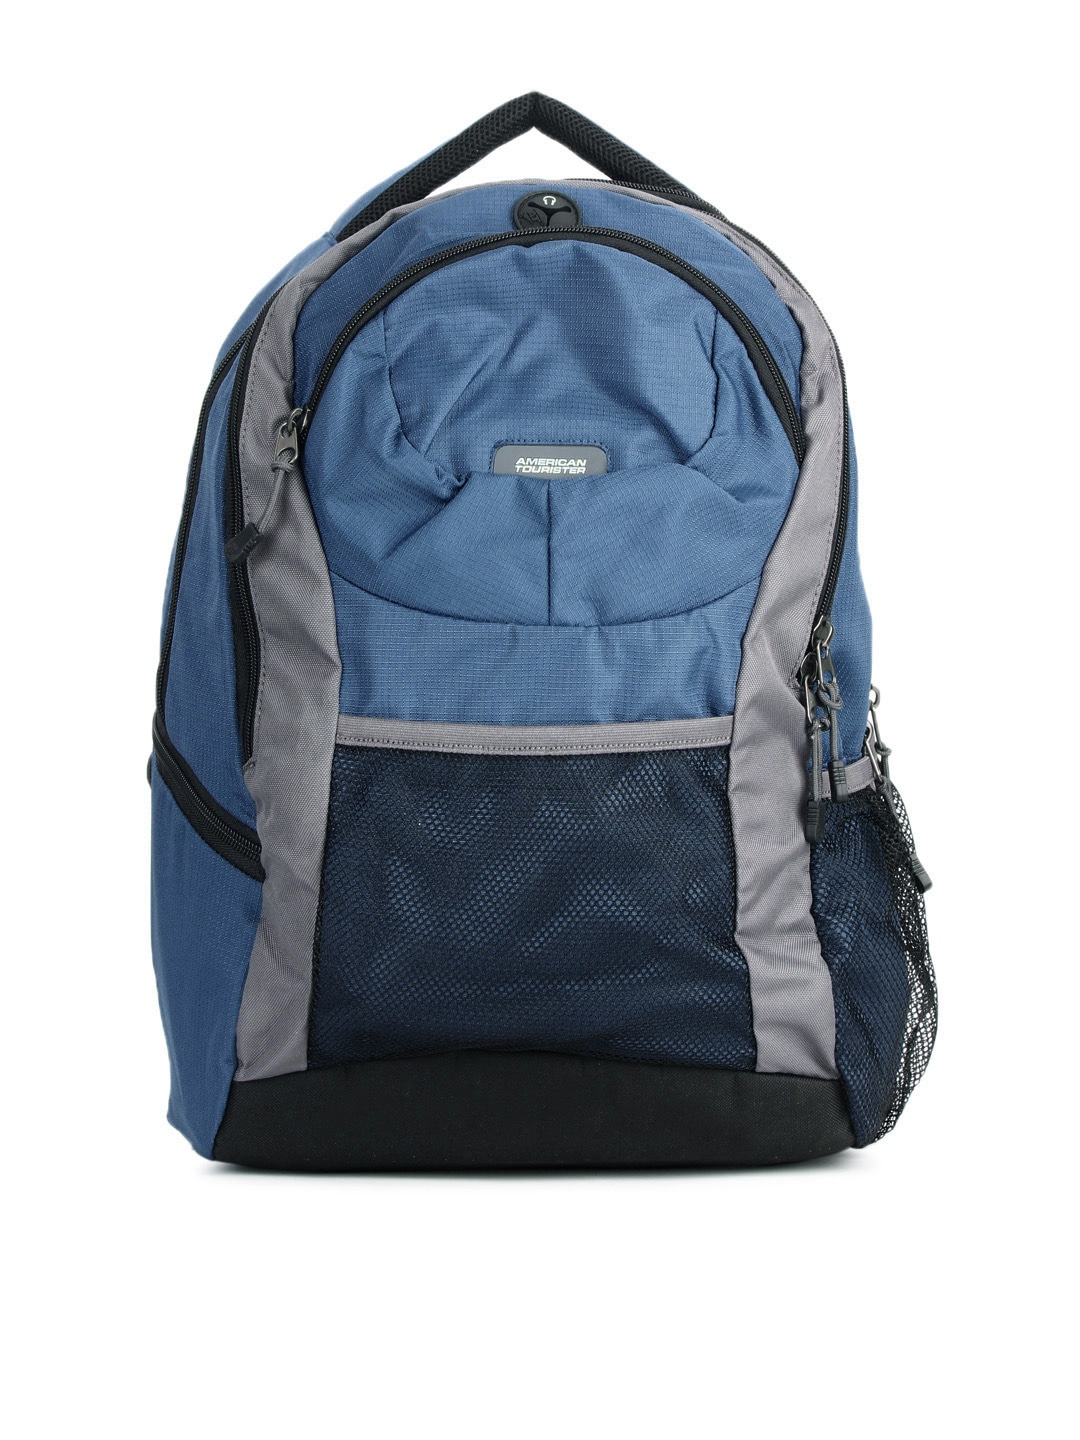 American Tourister Unisex Blue Backpack